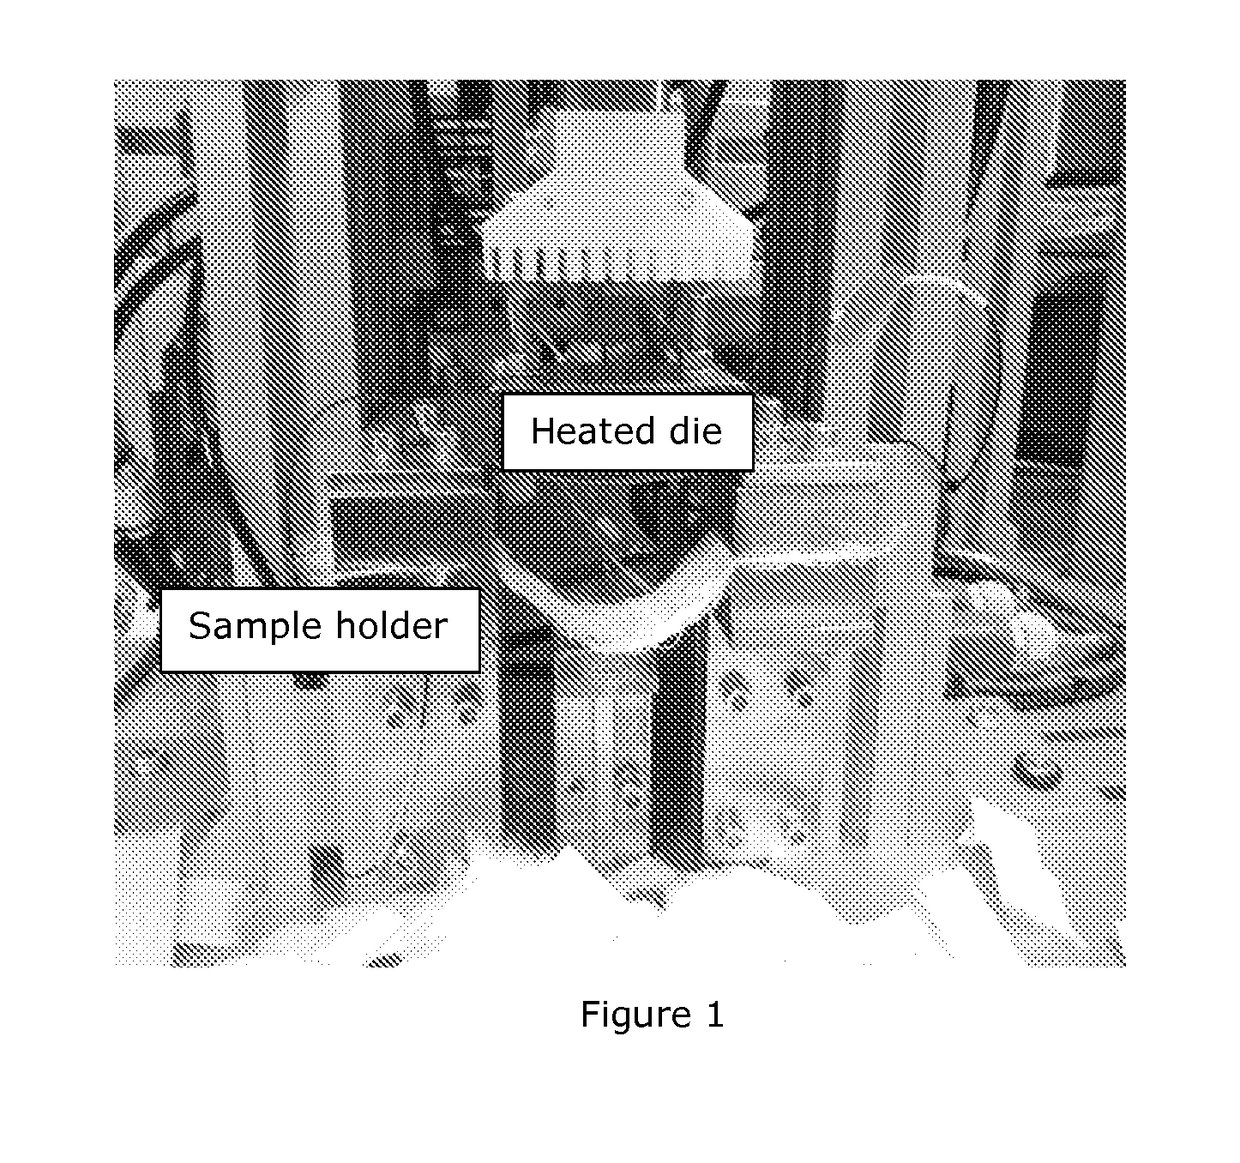 Thermoplastic fibrous materials and a method of producing the same